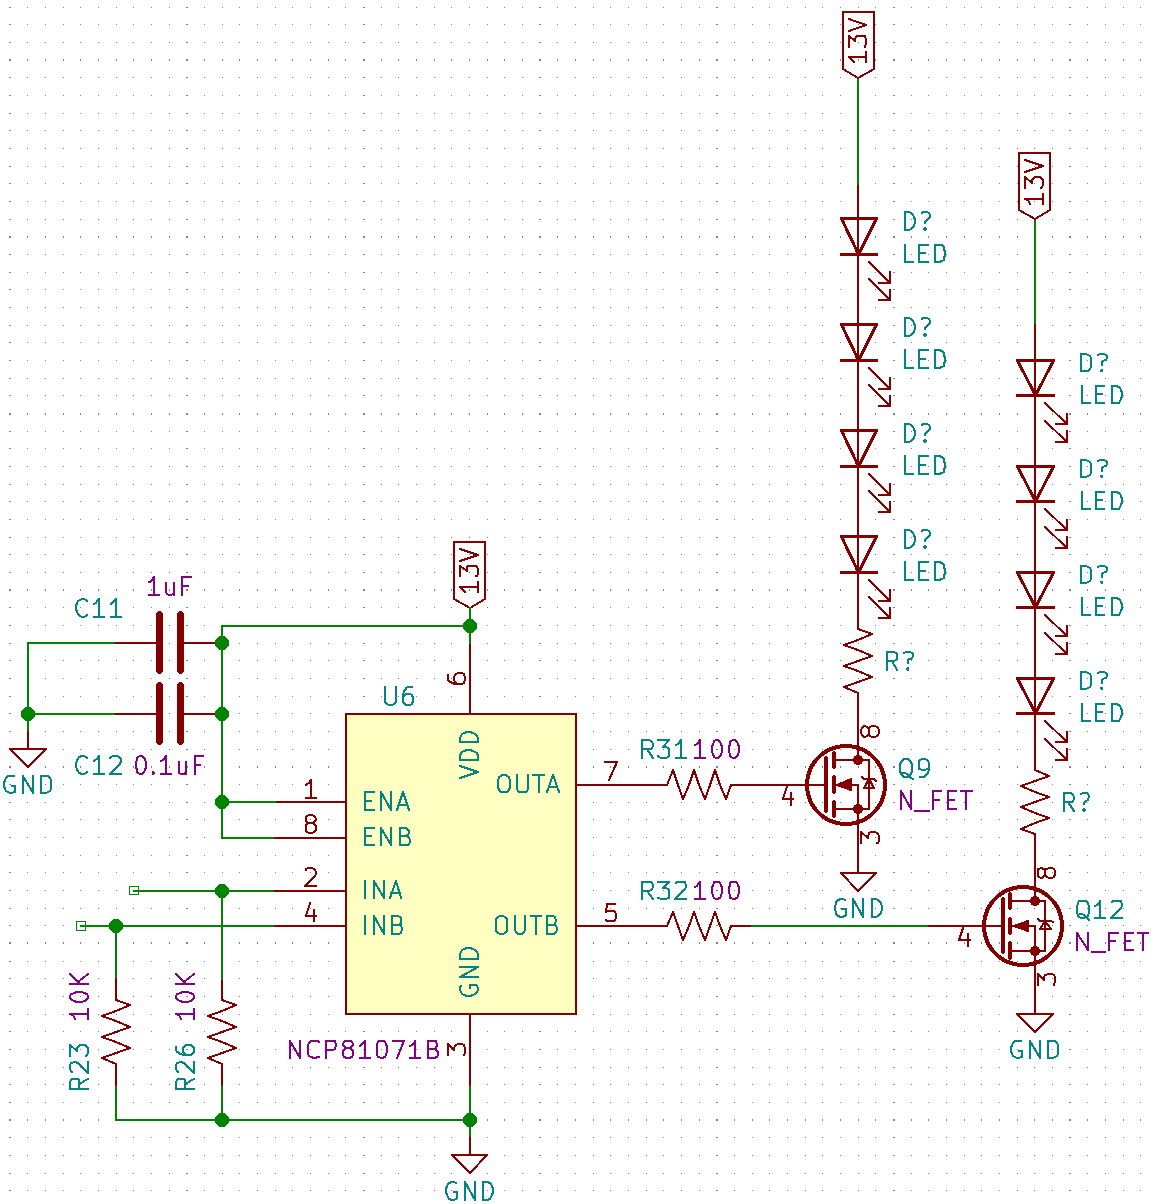 Low side MOSFET drives the LEDs at 14V. This lower voltage block on the circuit didn't require any troubleshooting